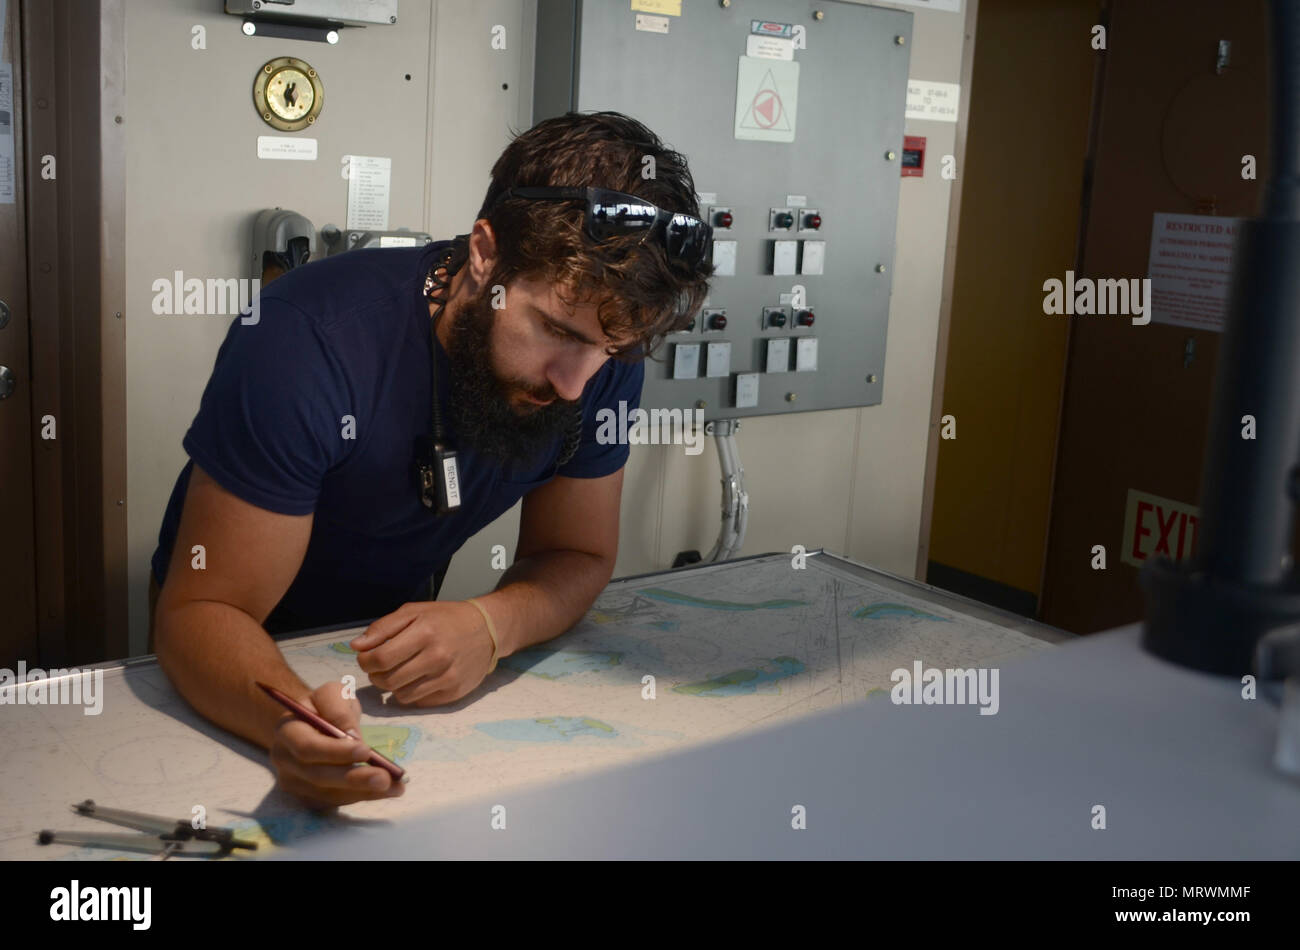 170711-N-WJ640-015 NOUMEA, New Caledonia (July 11, 2017) Aaron Caputo, Navigator/Operator aboard USNS Sacagawea (T-AKE 2), charts a course during sea and anchor detail for the ships outboard journey from New Caledonia during Koa Moana 17, July 11. Koa Moana 17 is designed to improve theater security, and conduct aw enforcement and infantry training in the Pacific region in order to enhance interoperability with partner nations. (U.S. Navy photo by Mass Communication Specialist 3rd Class Madailein Abbott) Stock Photo